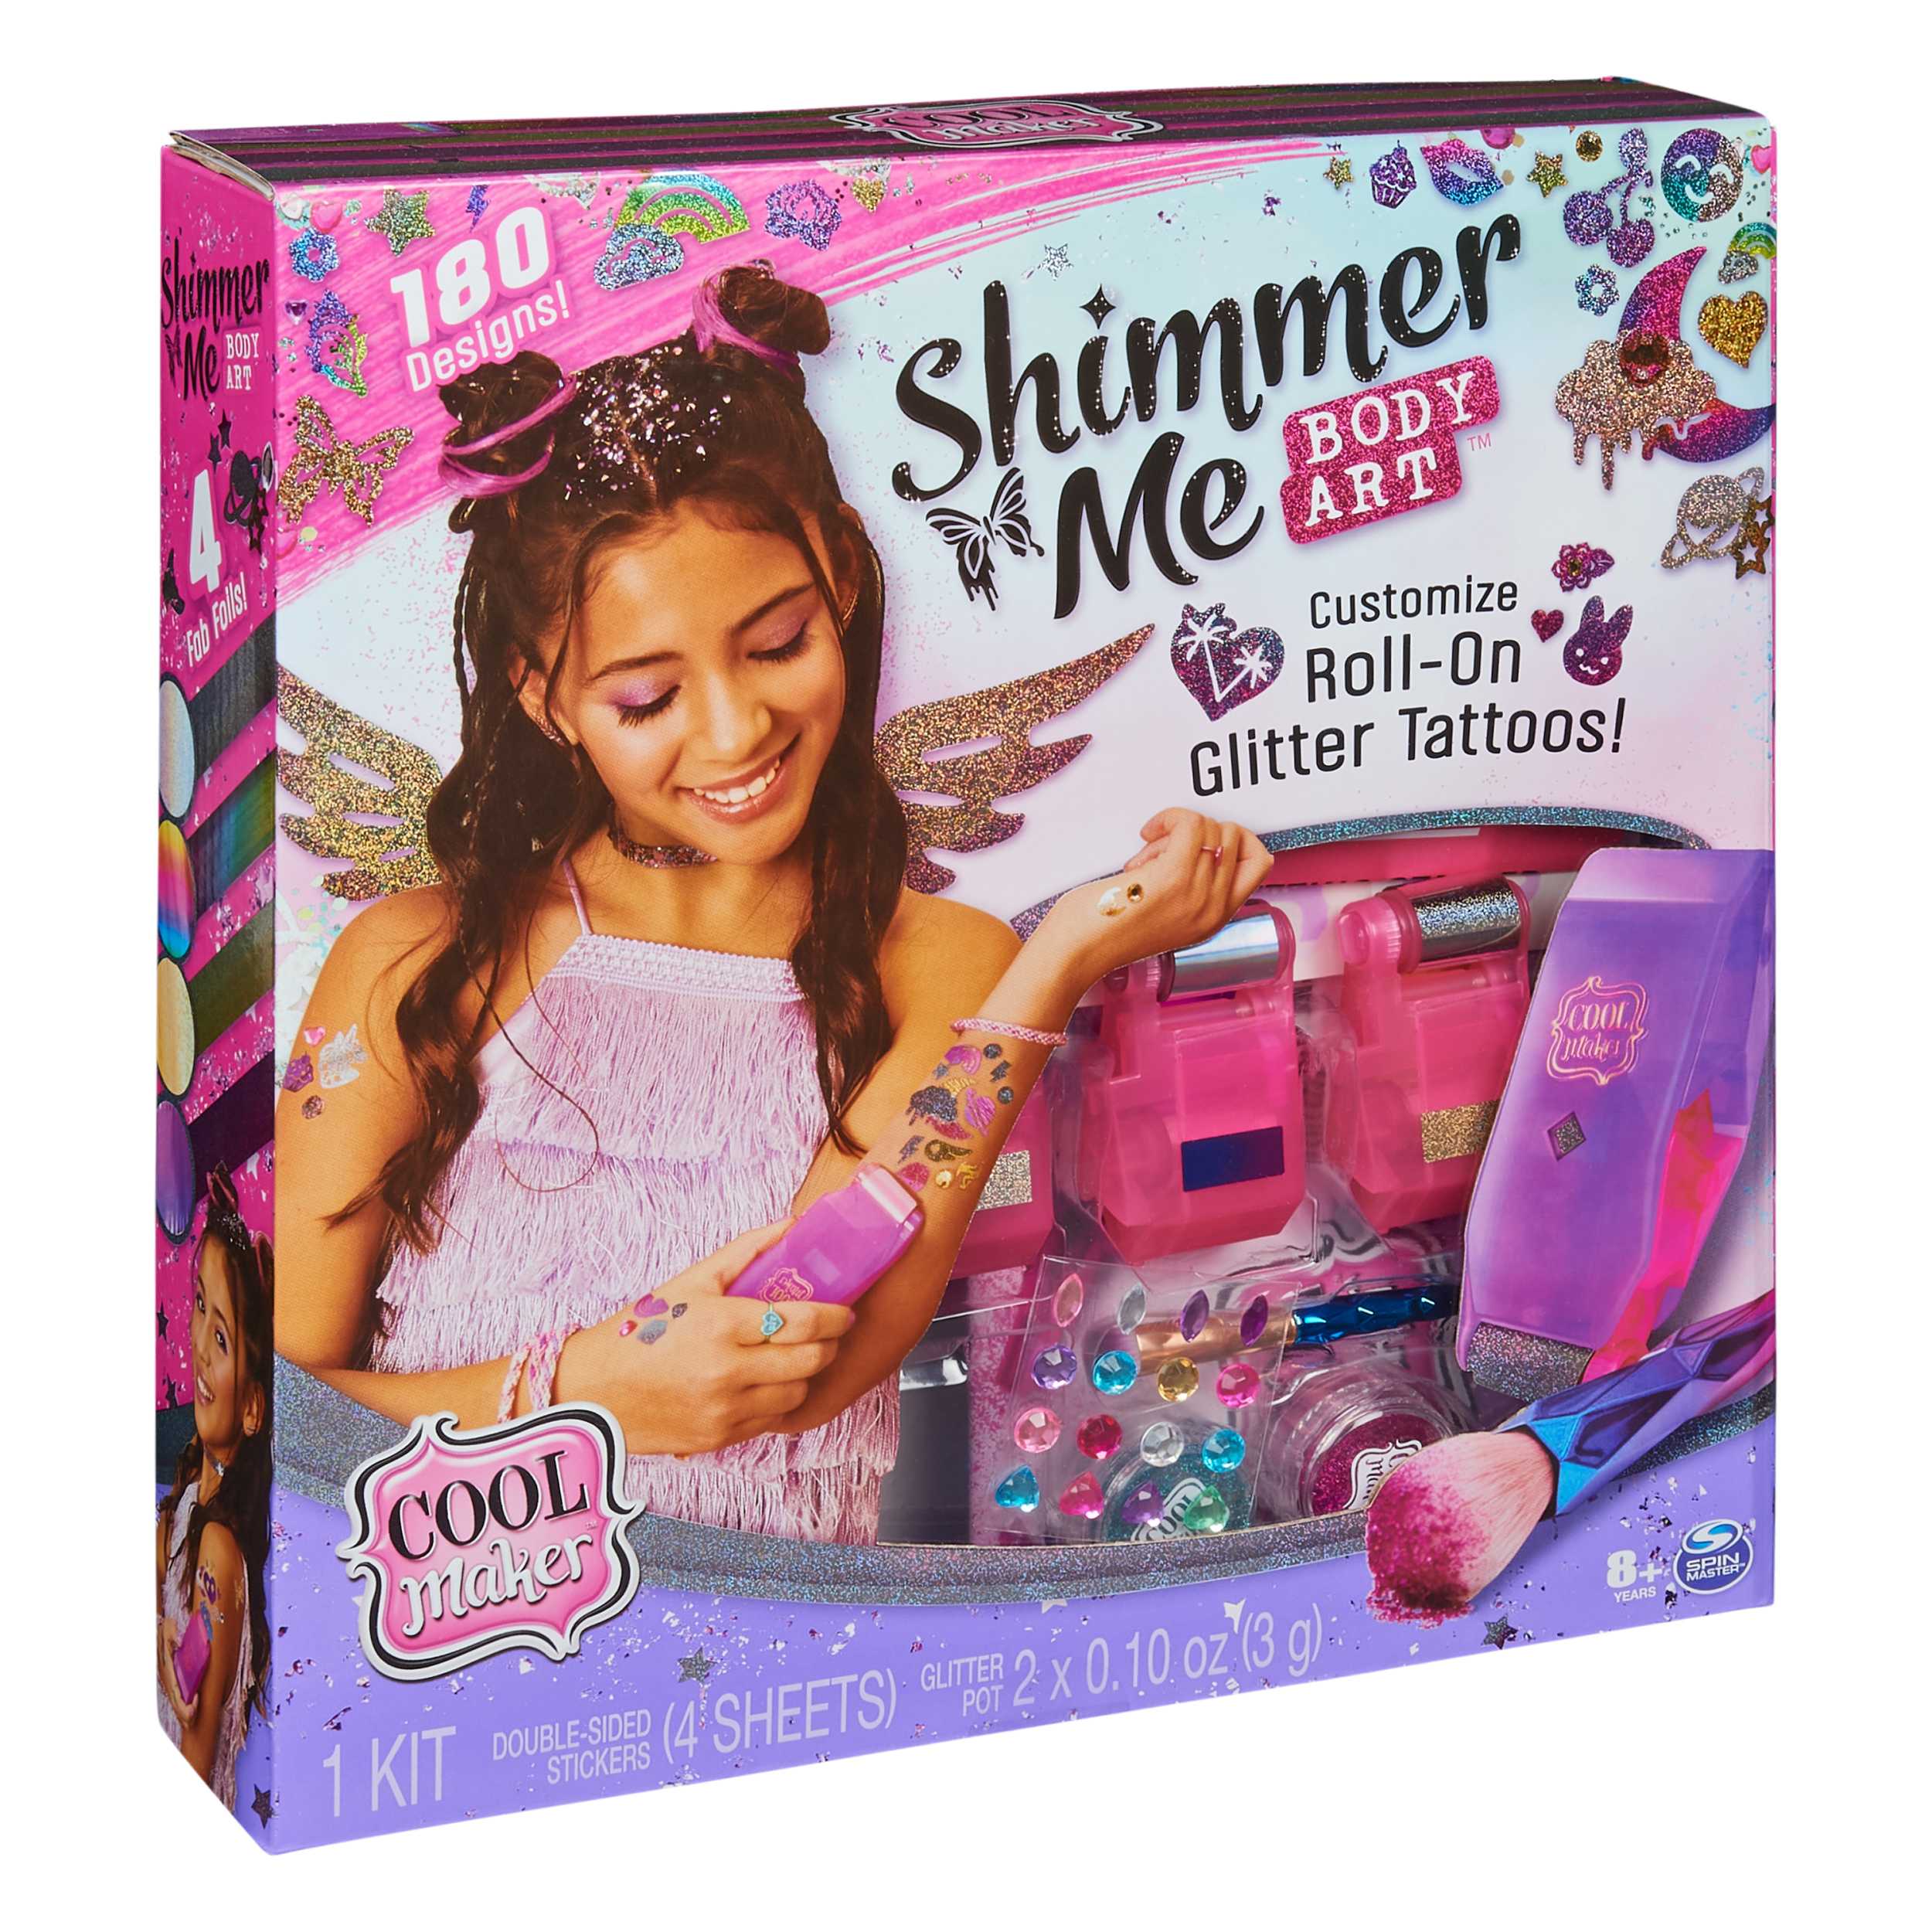 Shimmer Me Body Art with Roller